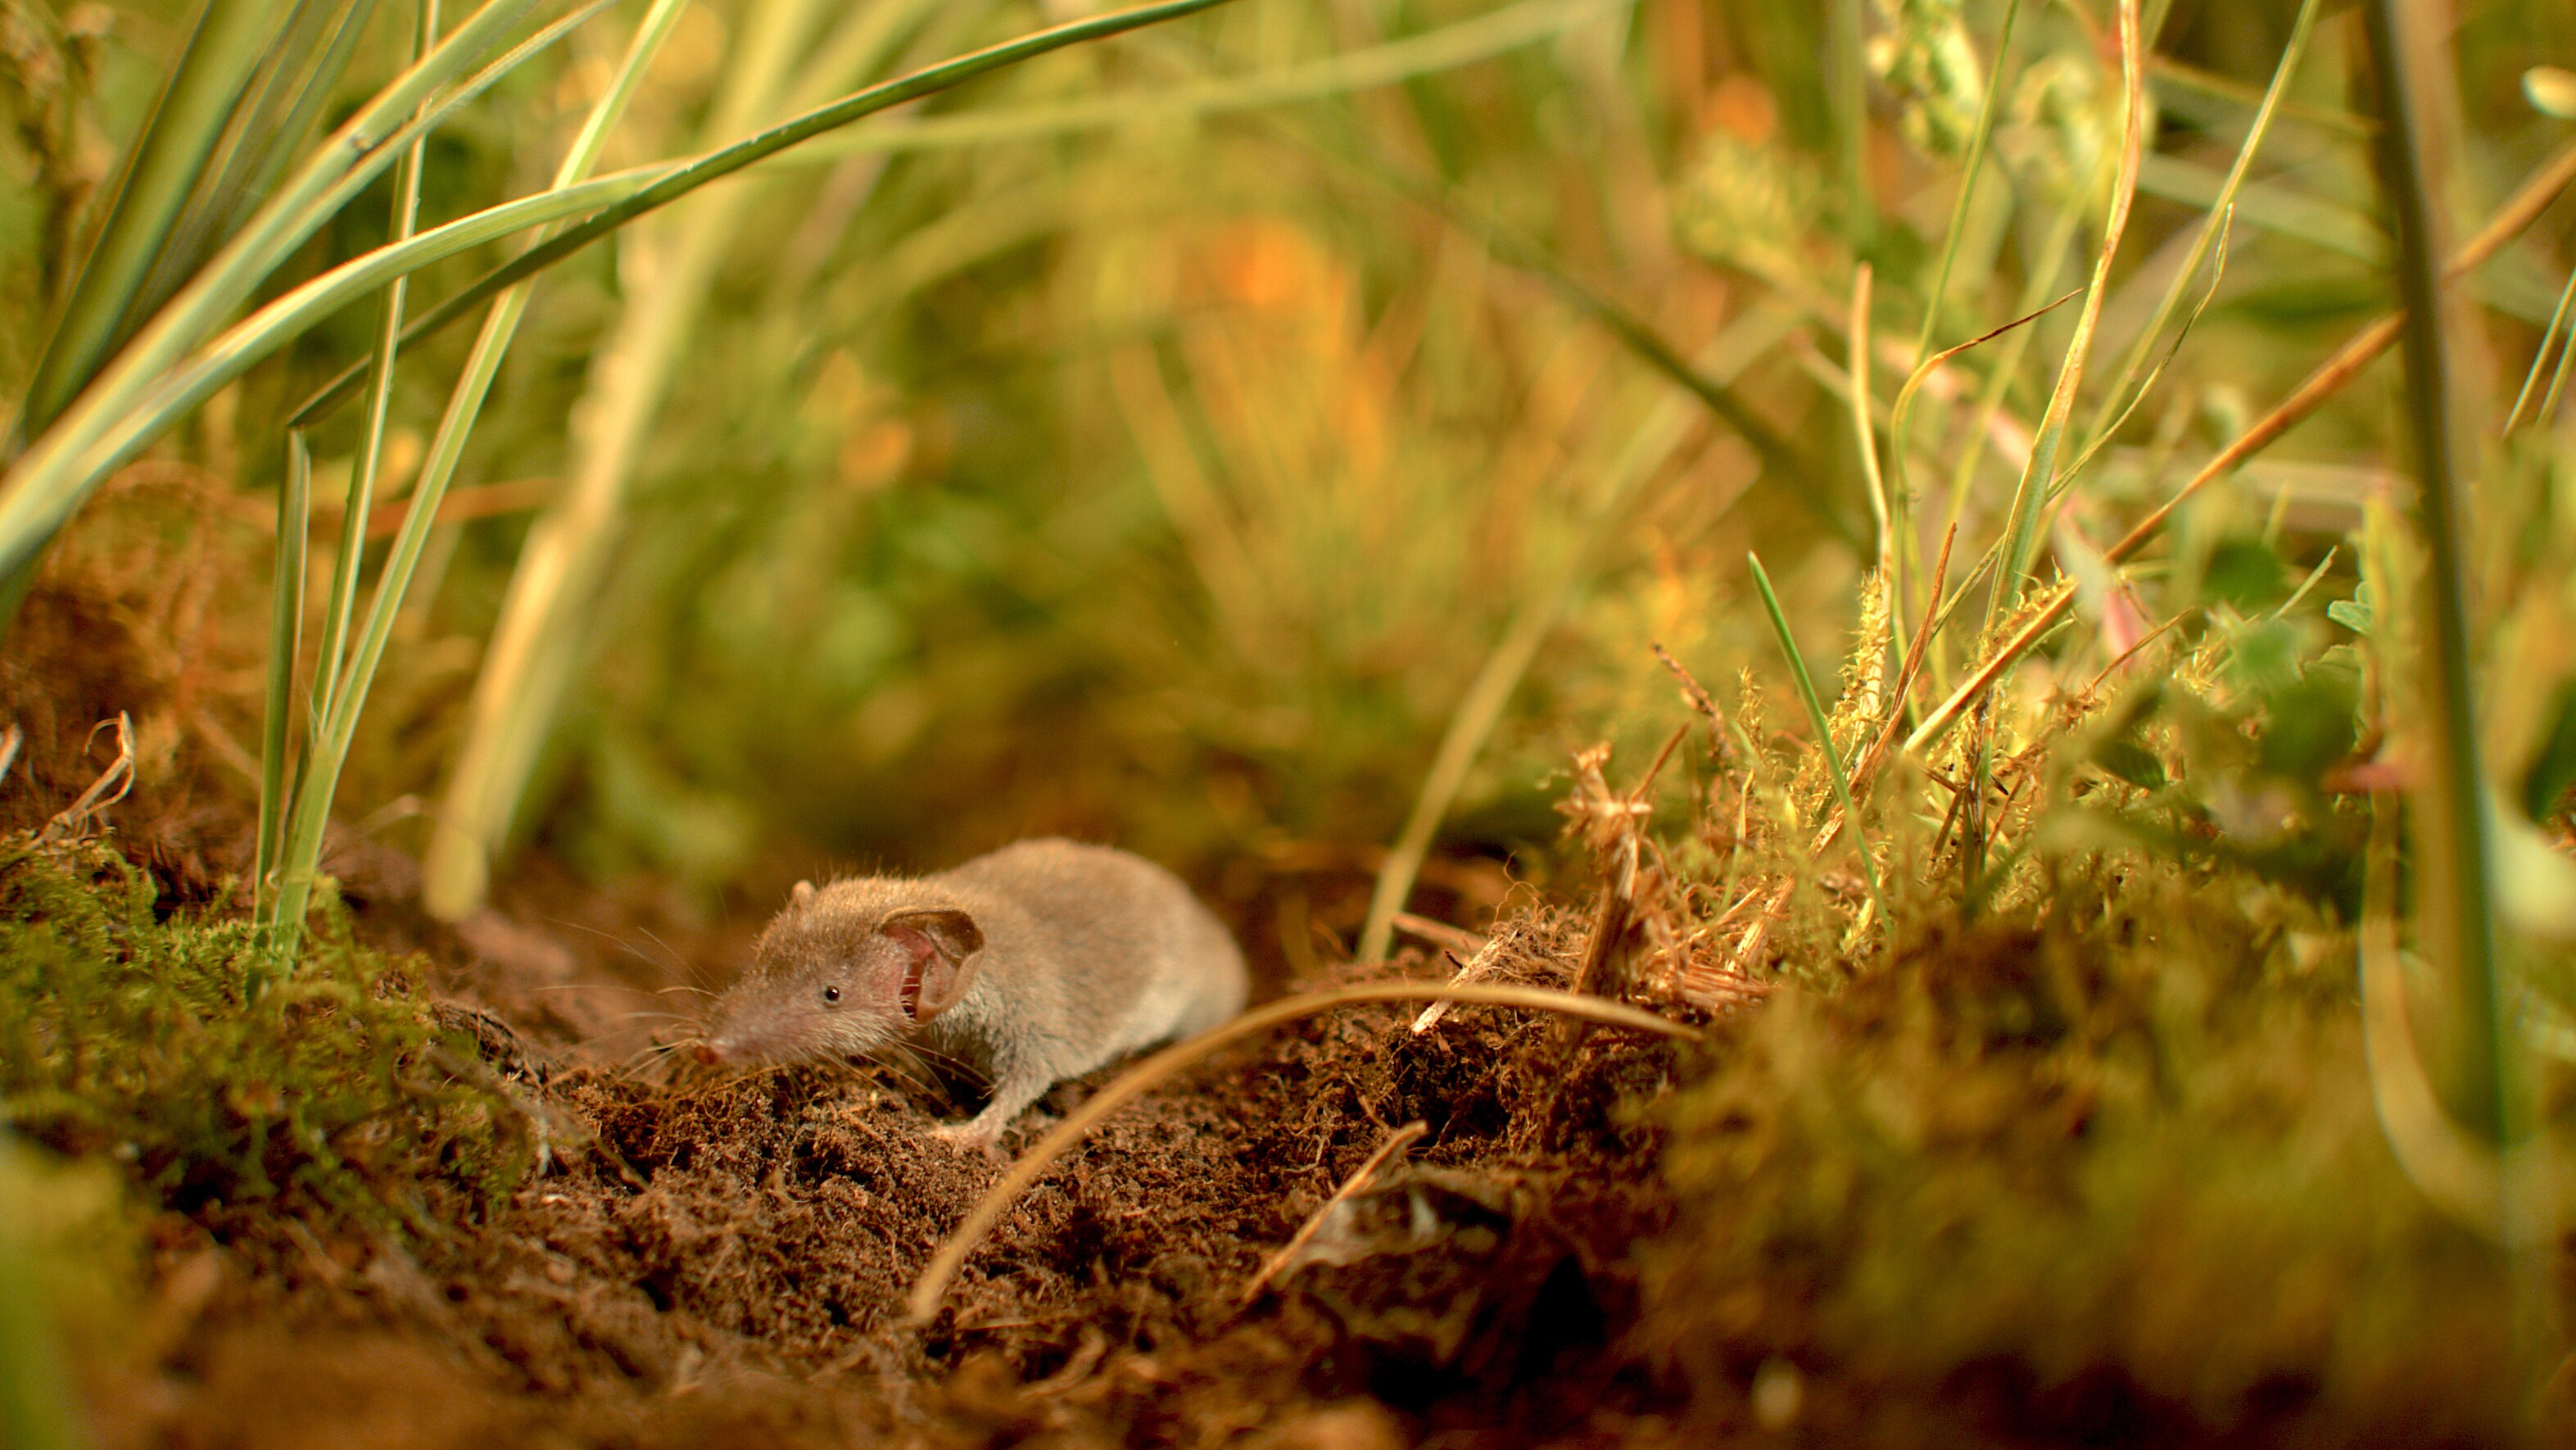 Etruscan shrew foraging in the grass.  (National Geographic for Disney+/Jonjo Harrington)